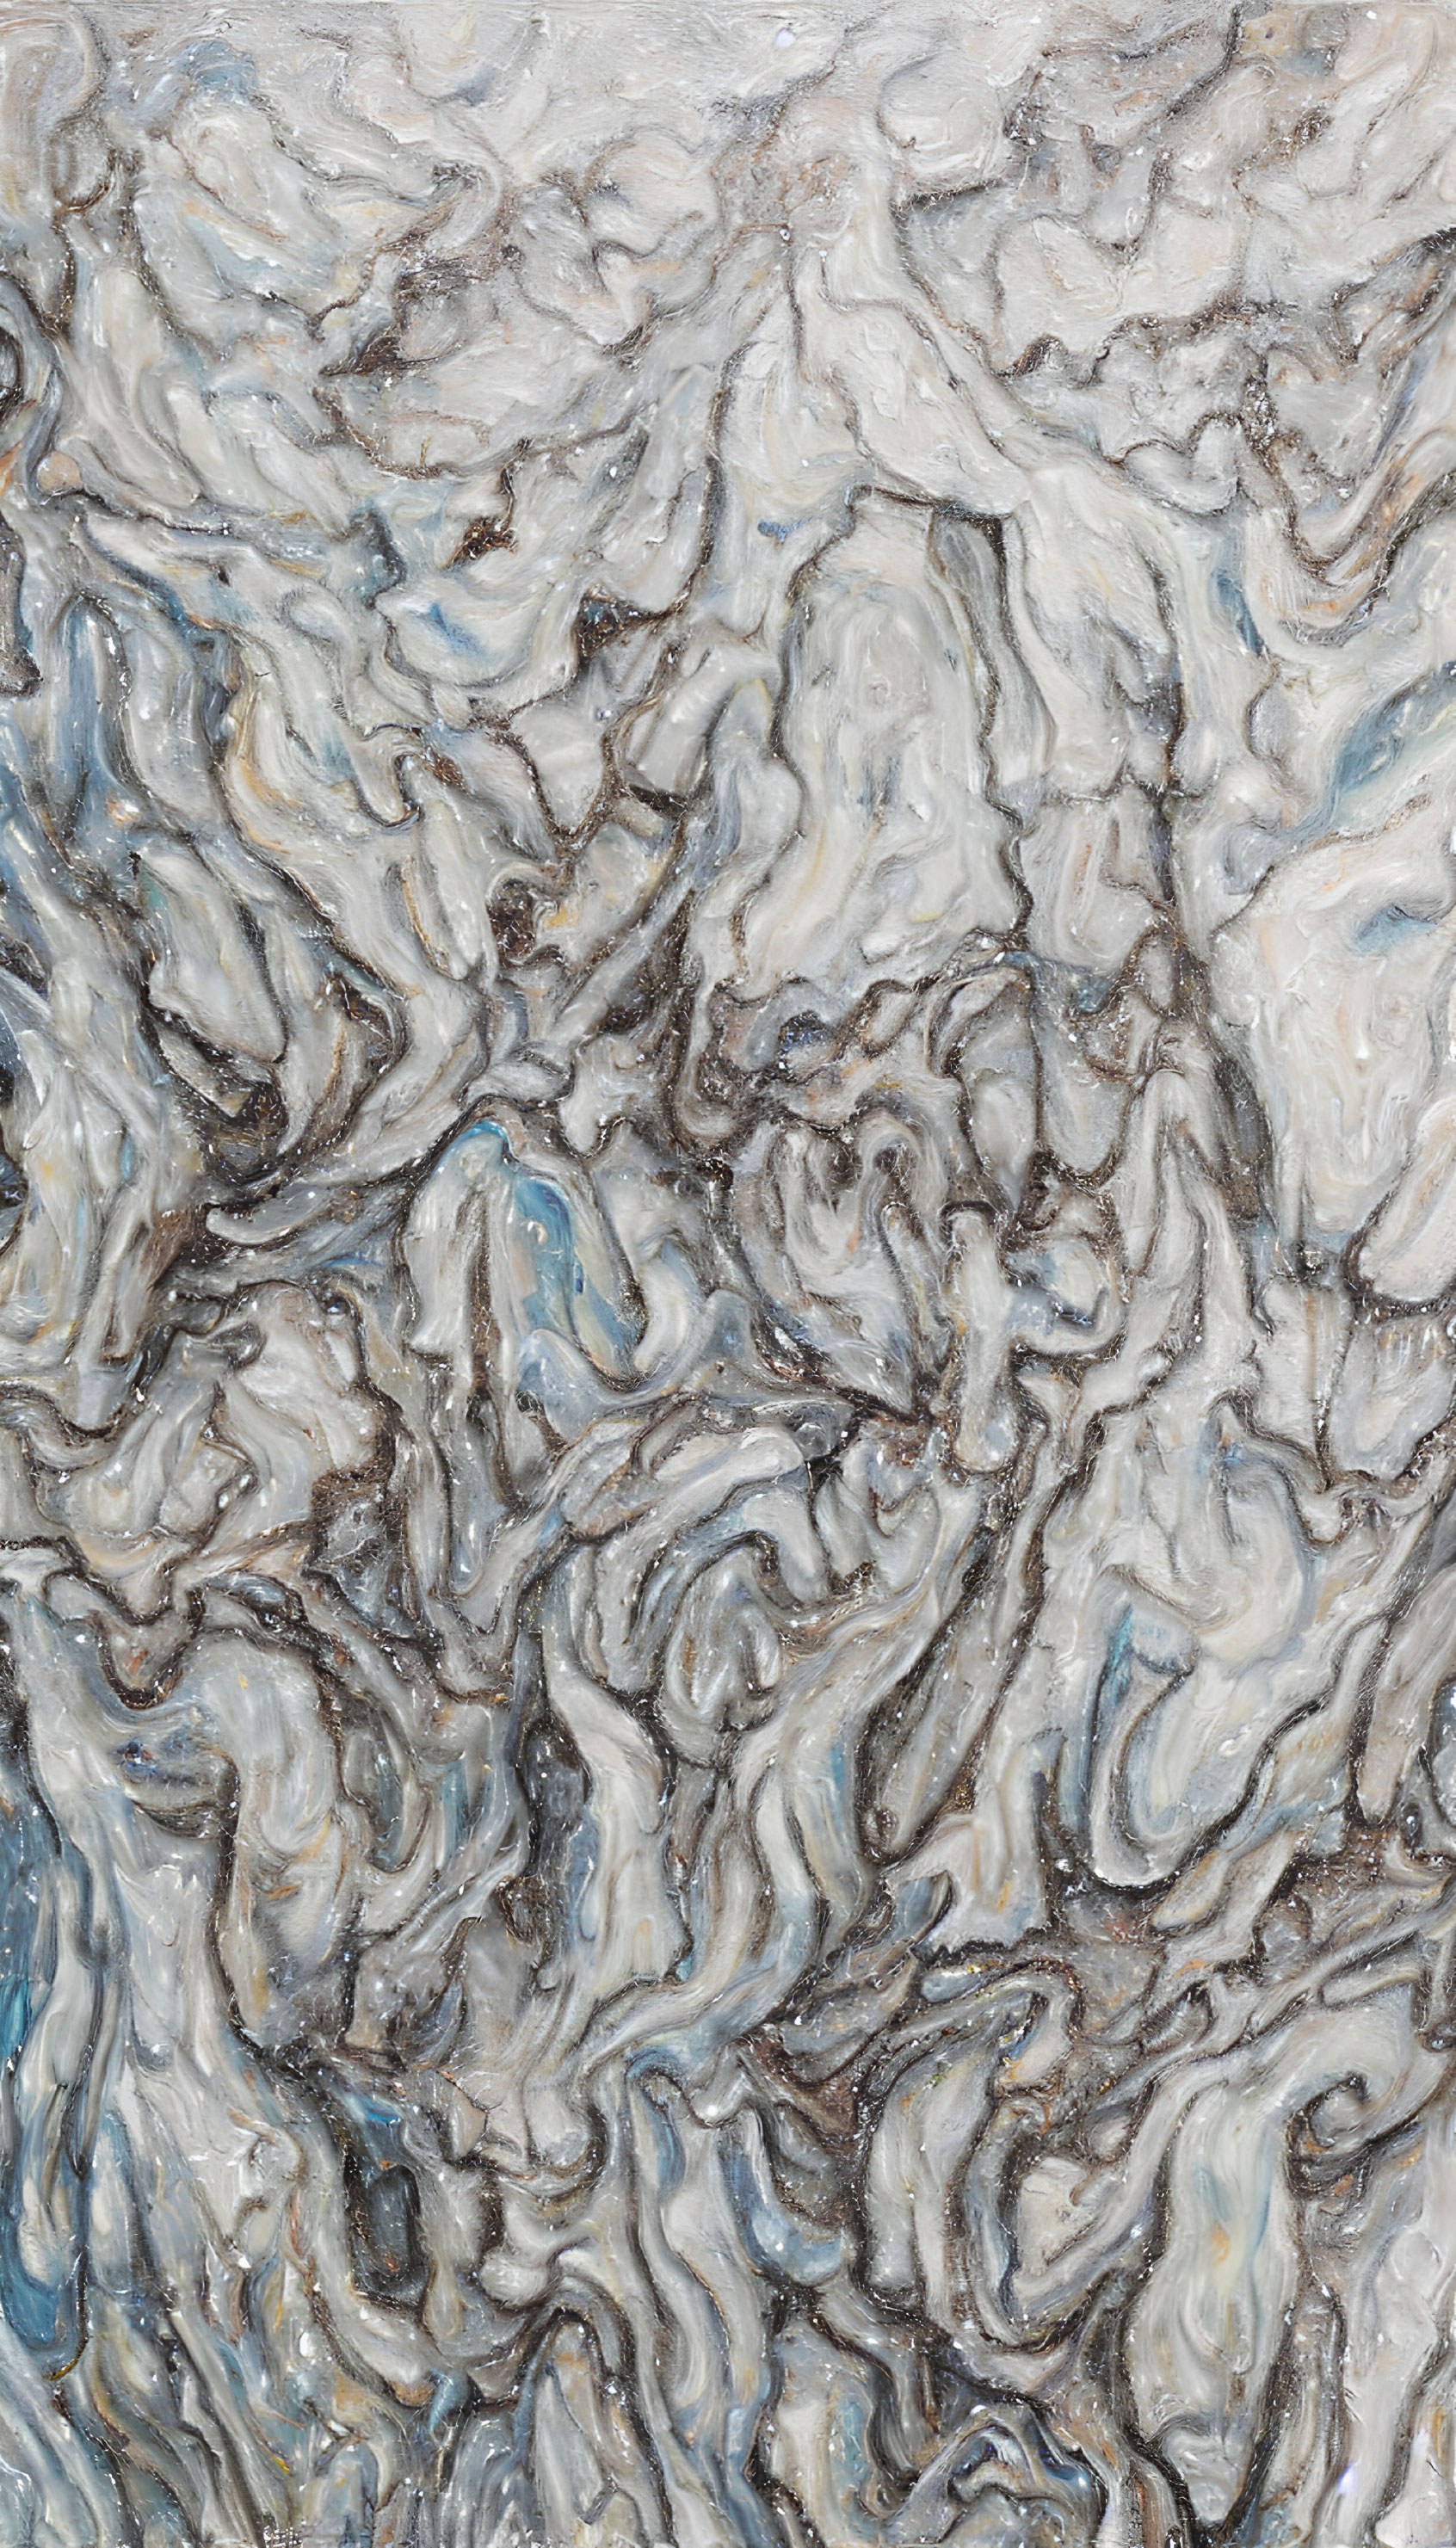 Abstract Painting: Textured Swirls in White, Gray, and Blue